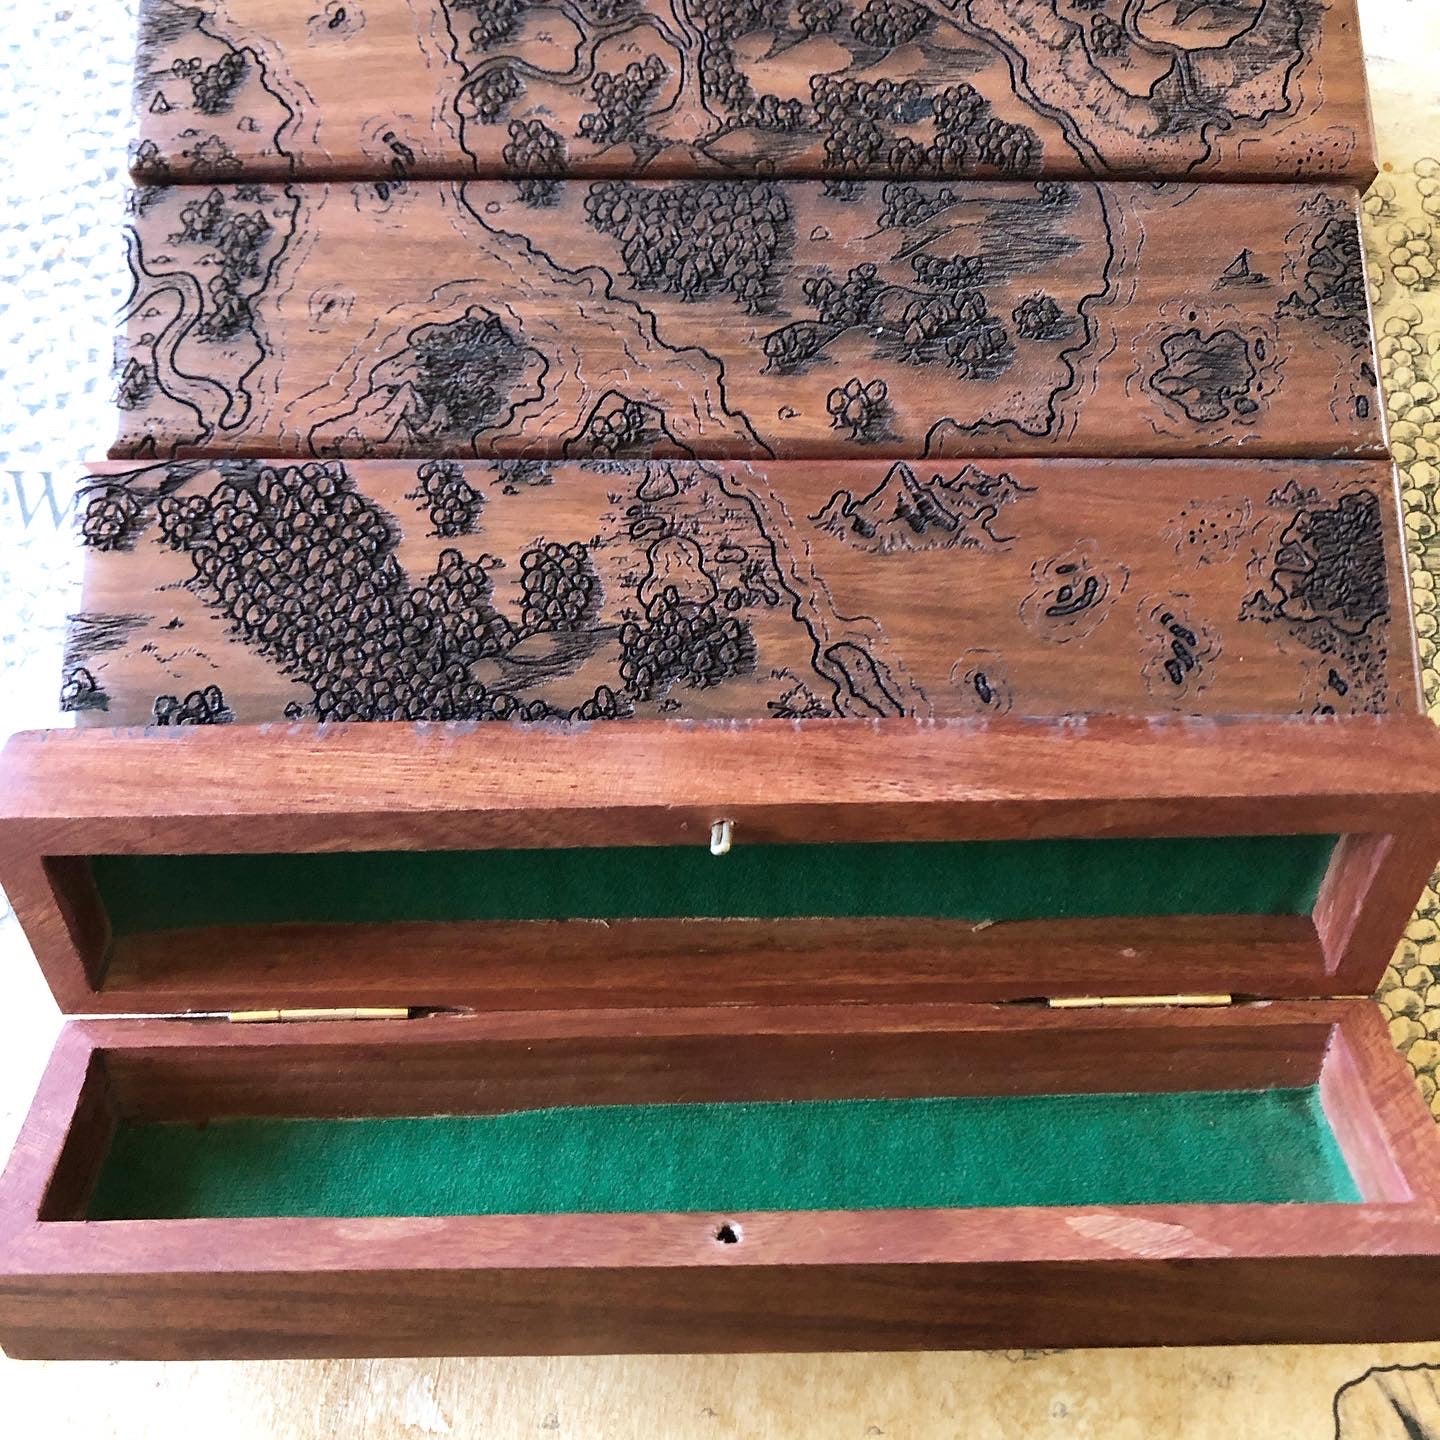 A collection of wood dice vaults lined up to show the parts of a Deven Rue world map burned into the tops, the last in line open to show a forest green liner.